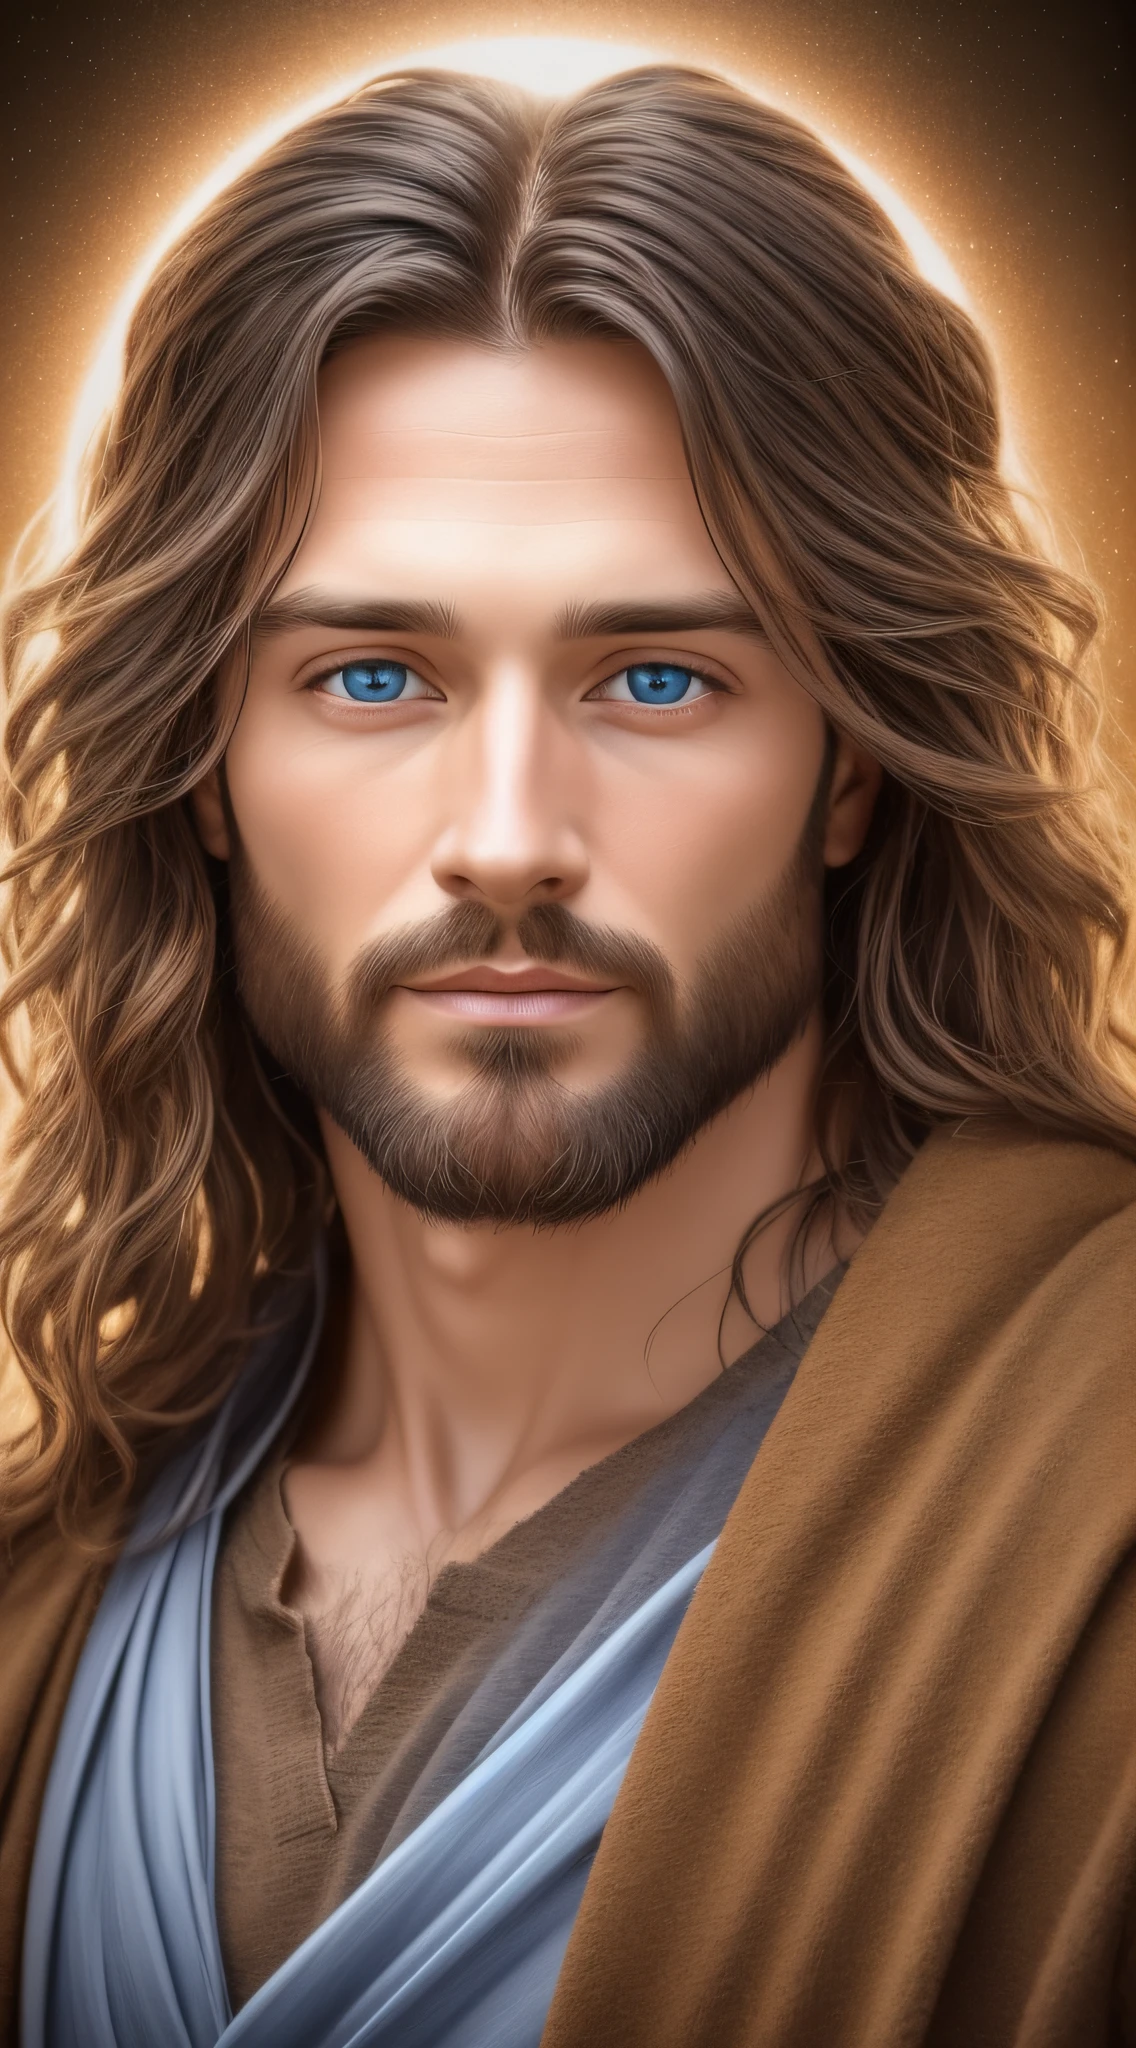 Front photo of a man, Jesus Christ, face of Jesus, real blue eyes, hair of Jesus, realistic photo, realism, frontal image, Jesus looking forward, Jesus with light and welcoming expression, backlight, darker edges, realism, divine image